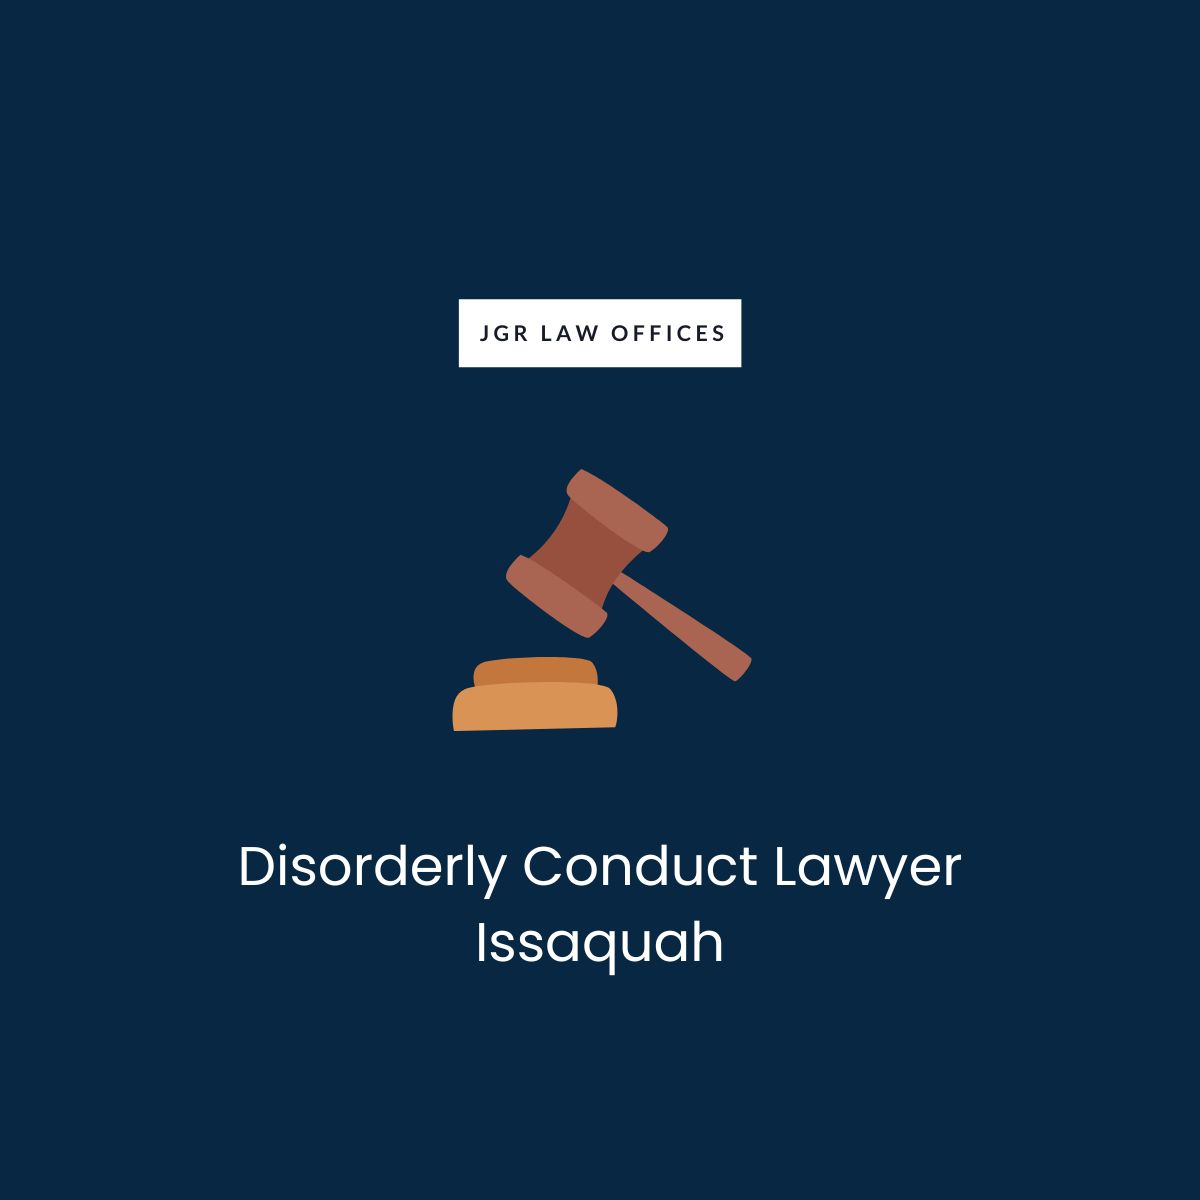 Disorderly Conduct Lawyer Issaquah Disorderly Conduct